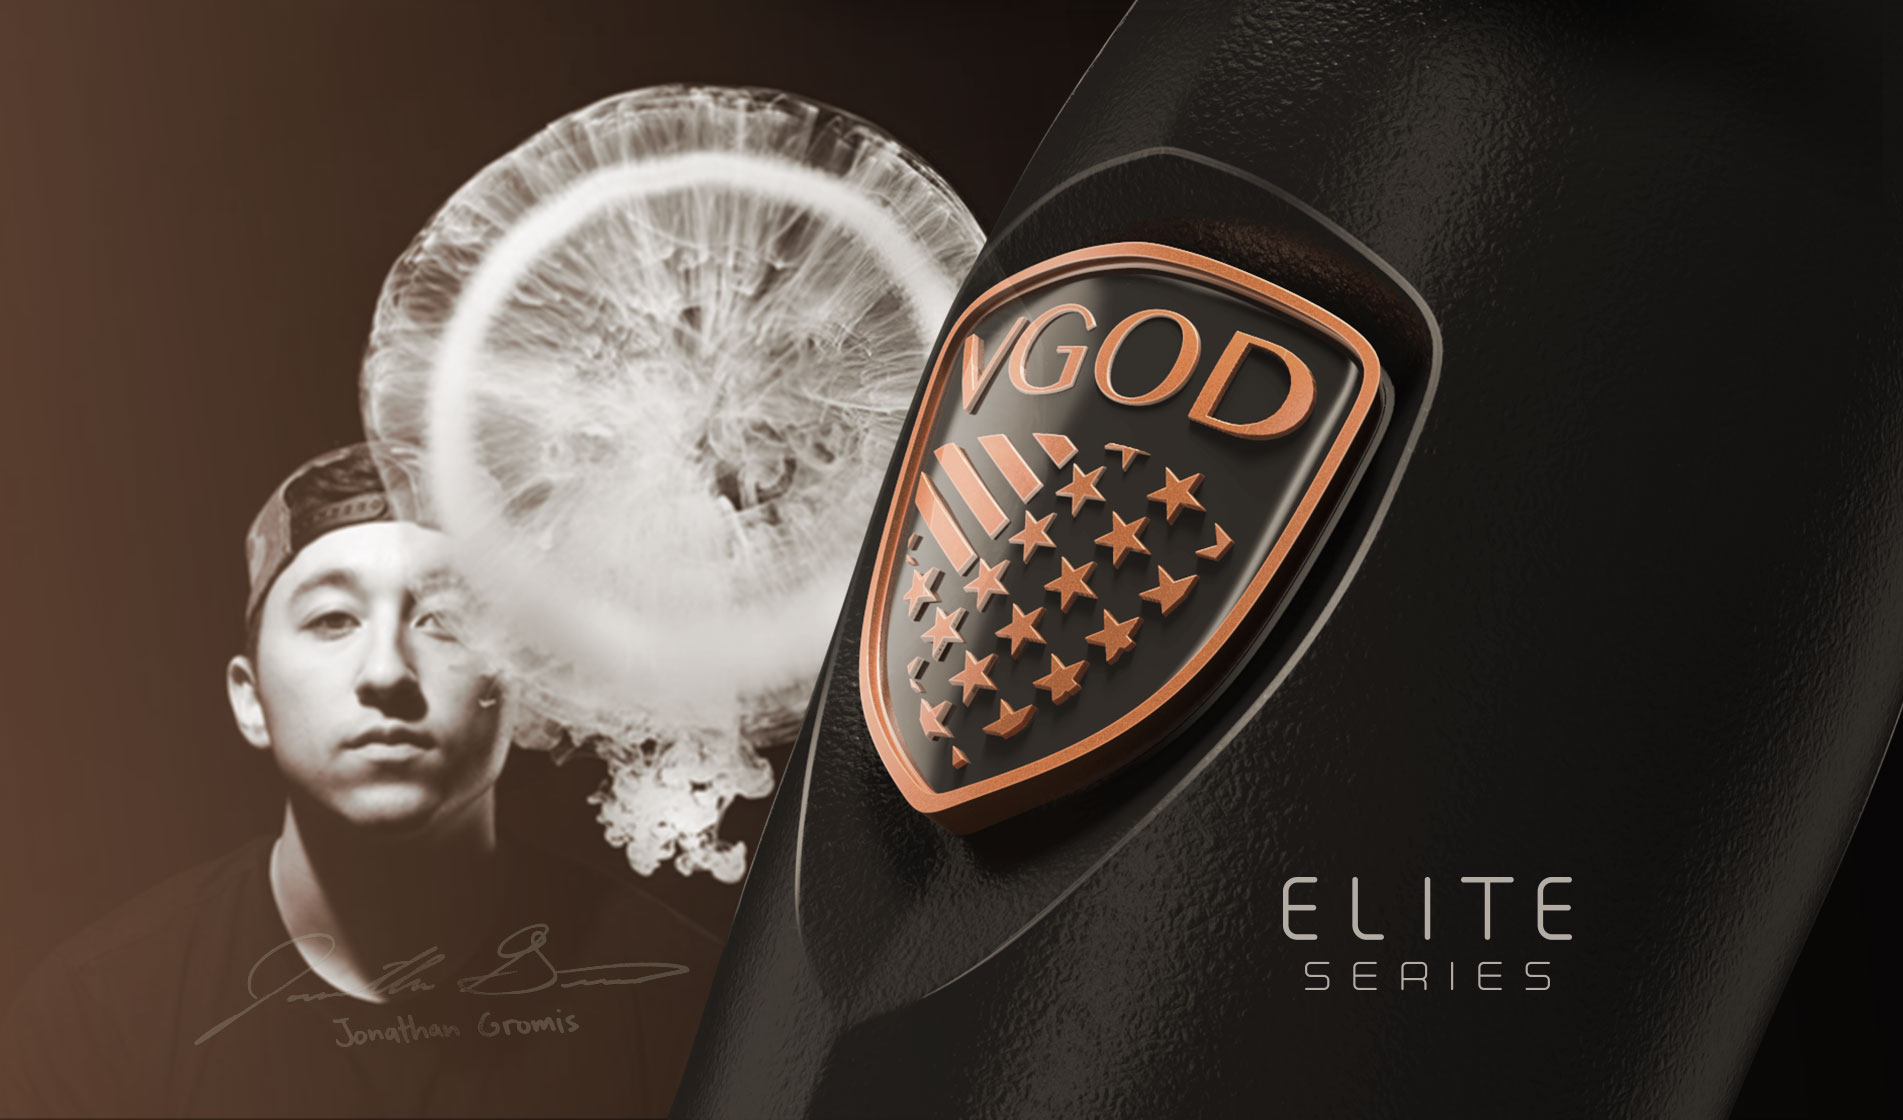 VGOD Elite Series Collection